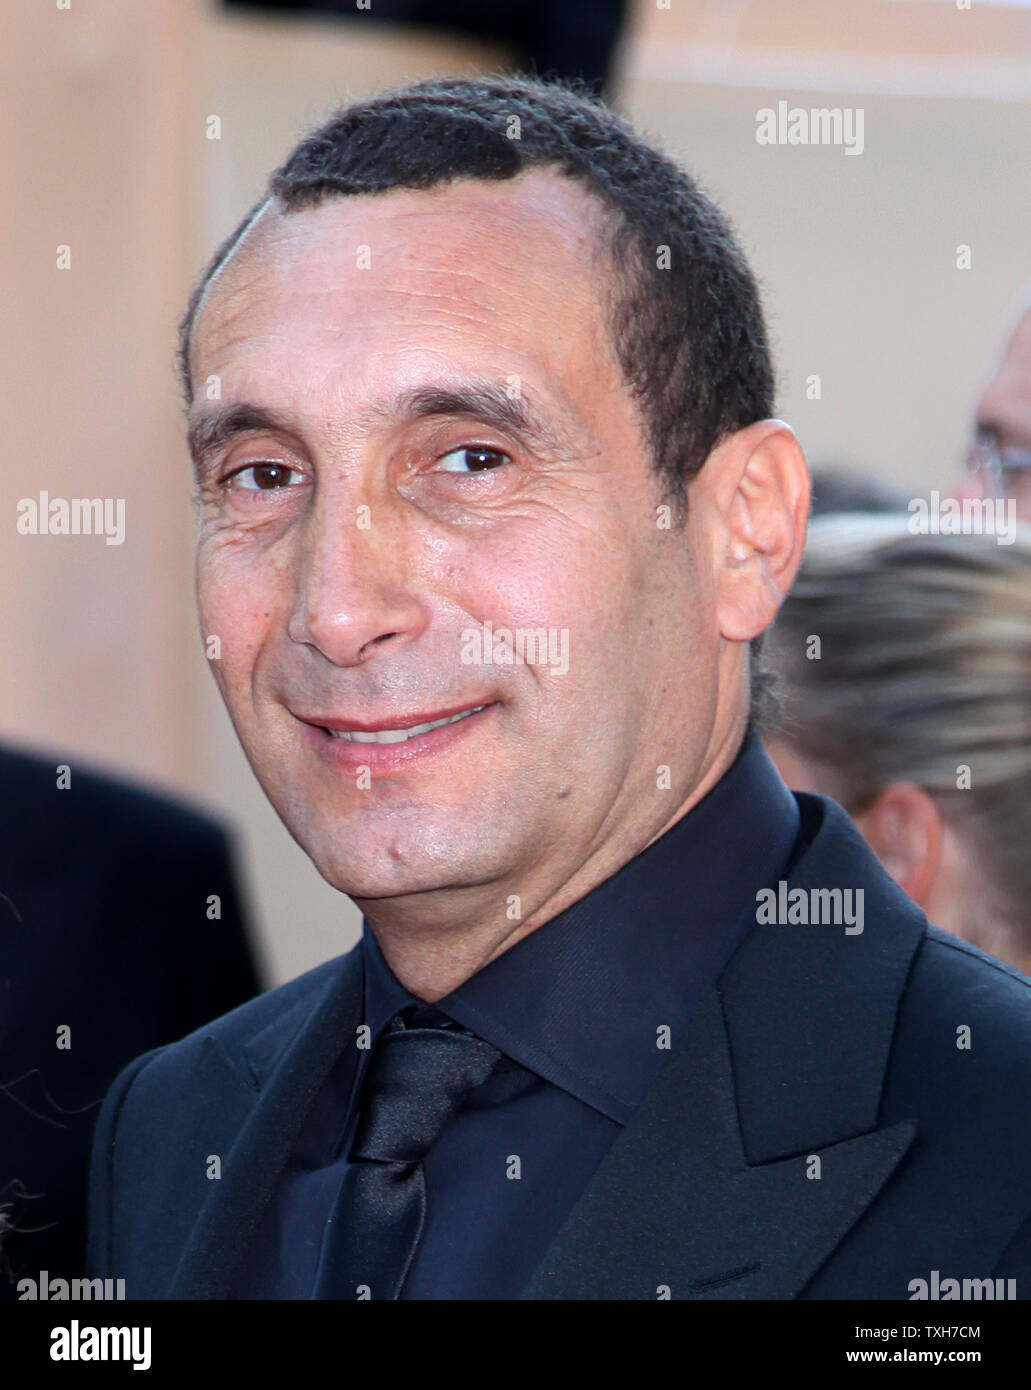 Zinedine Soualem arrives on the red carpet before the screening of the film 'La Source des Femmes (The Source)' during the 64th annual Cannes International Film Festival in Cannes, France on May 21, 2011.  UPI/David Silpa Stock Photo